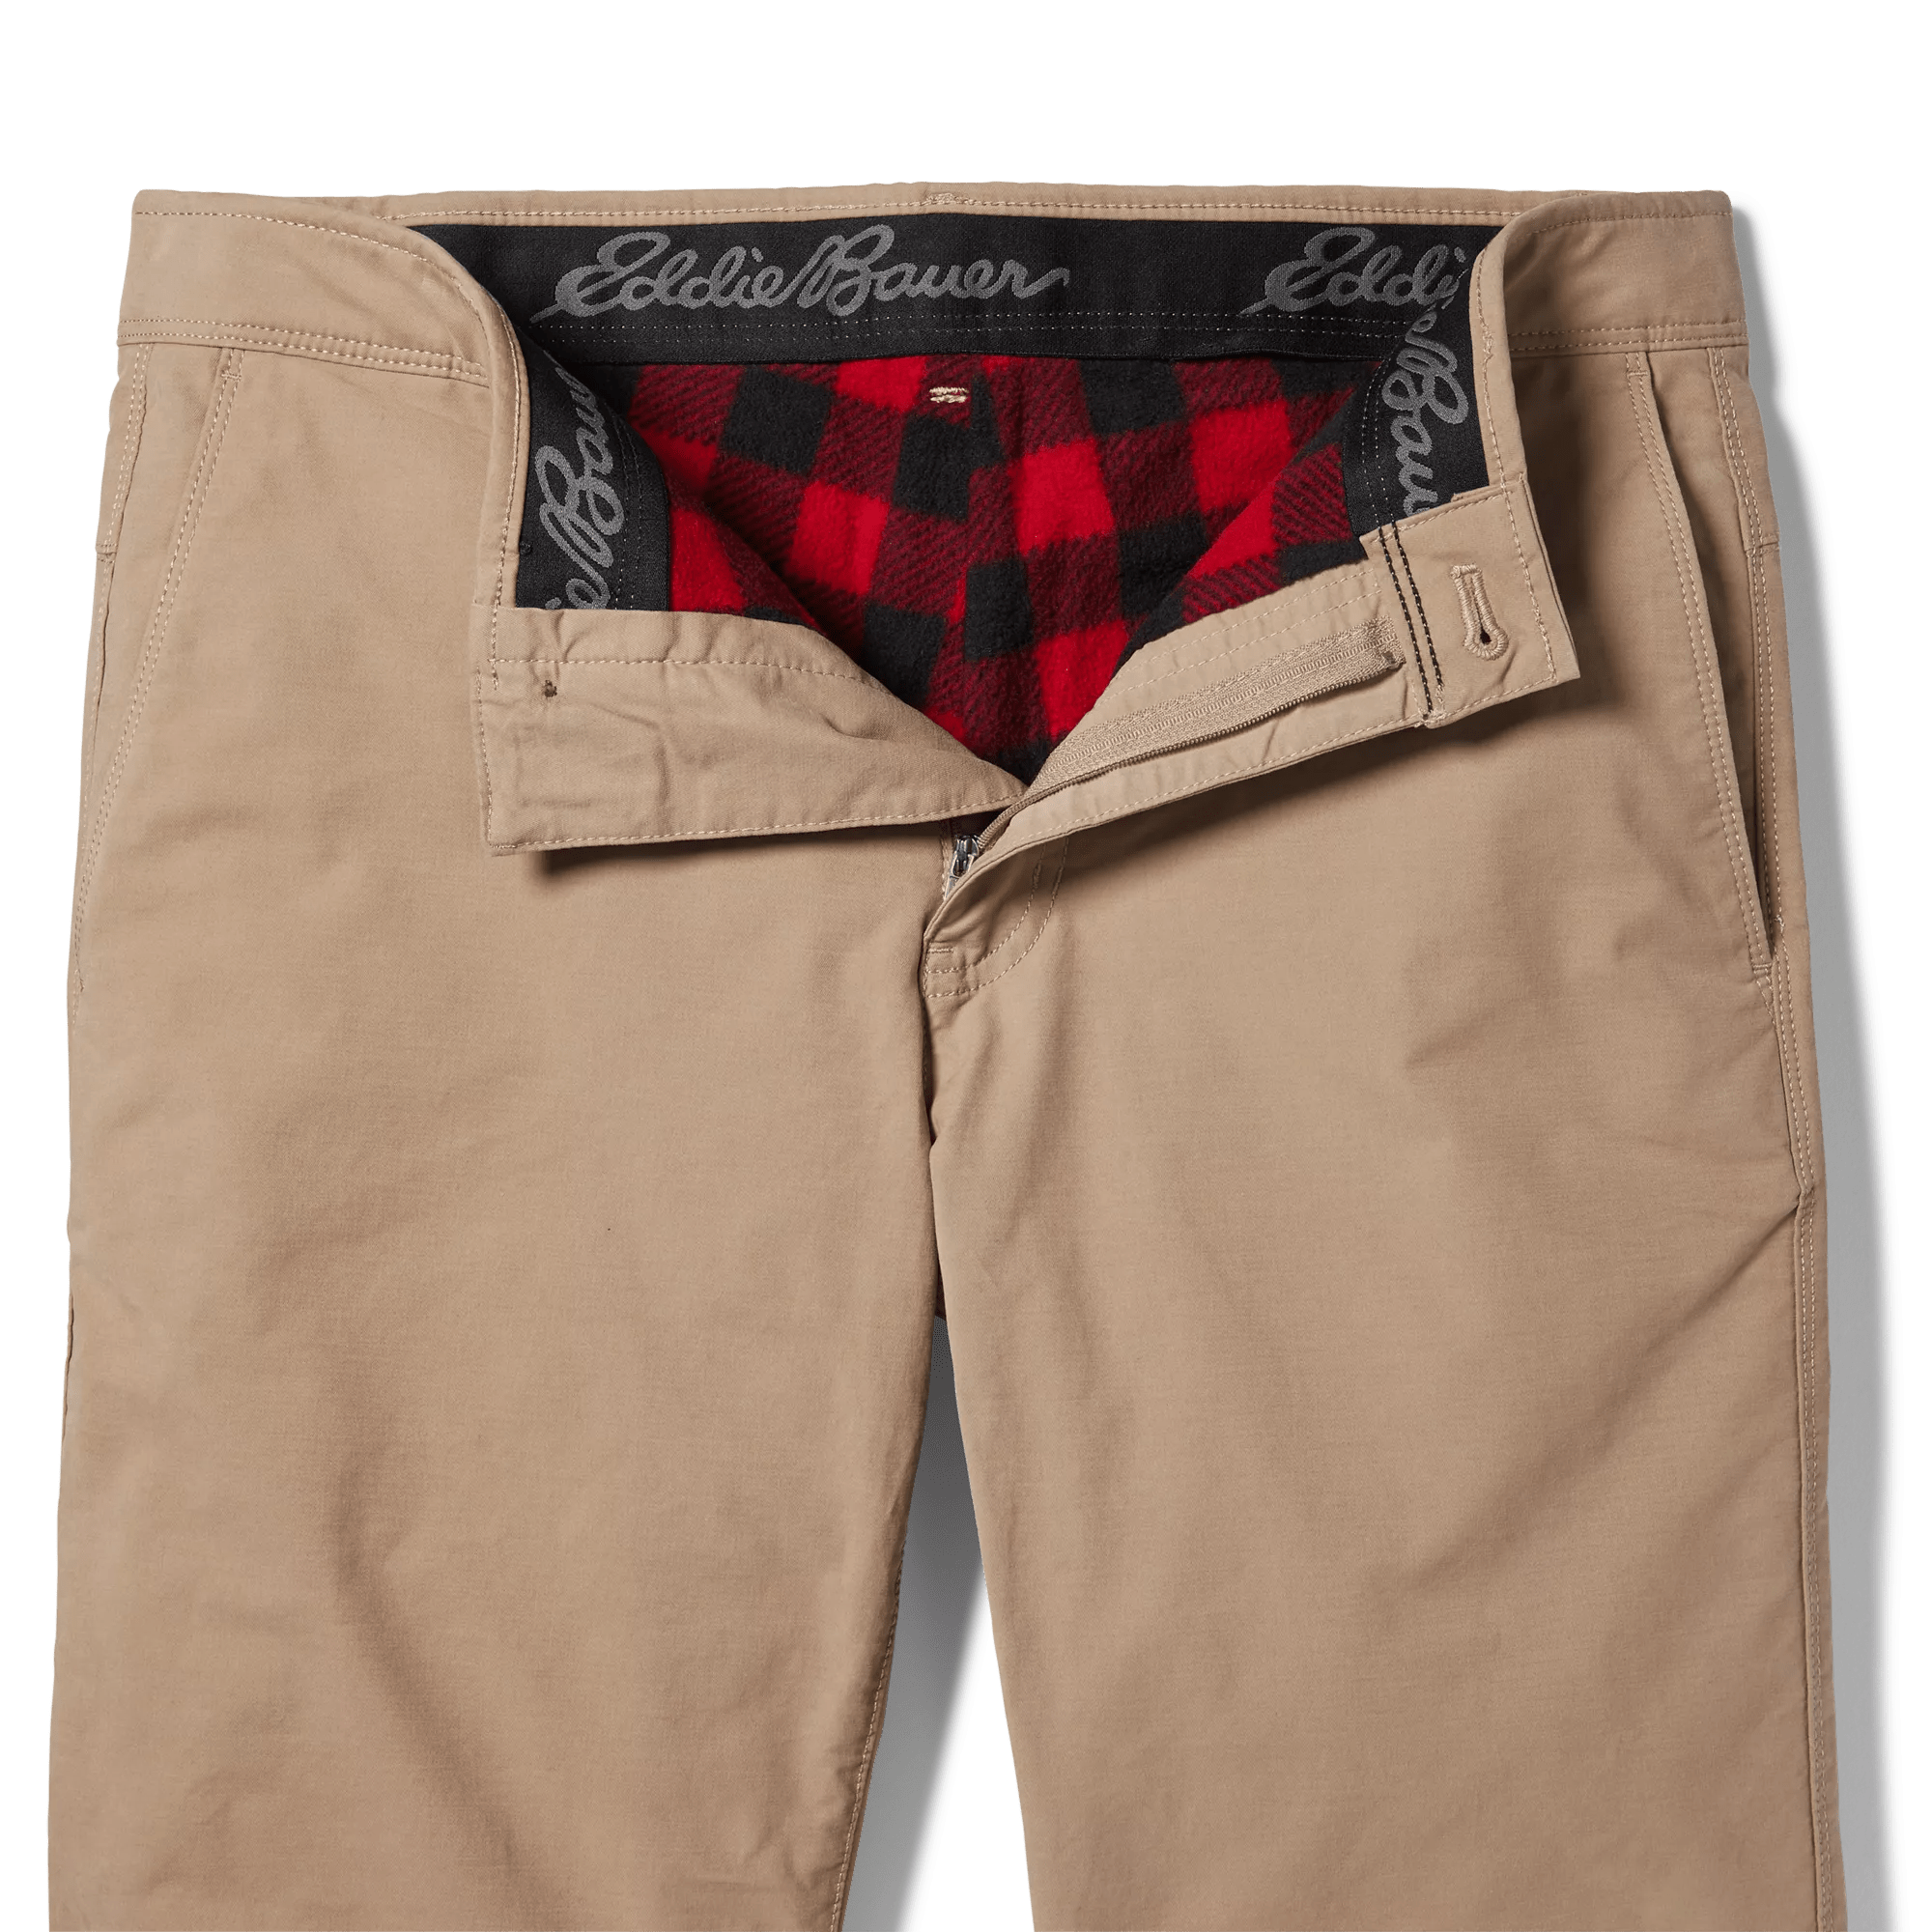 Voyager Flex Fleece-Lined Chino Pants